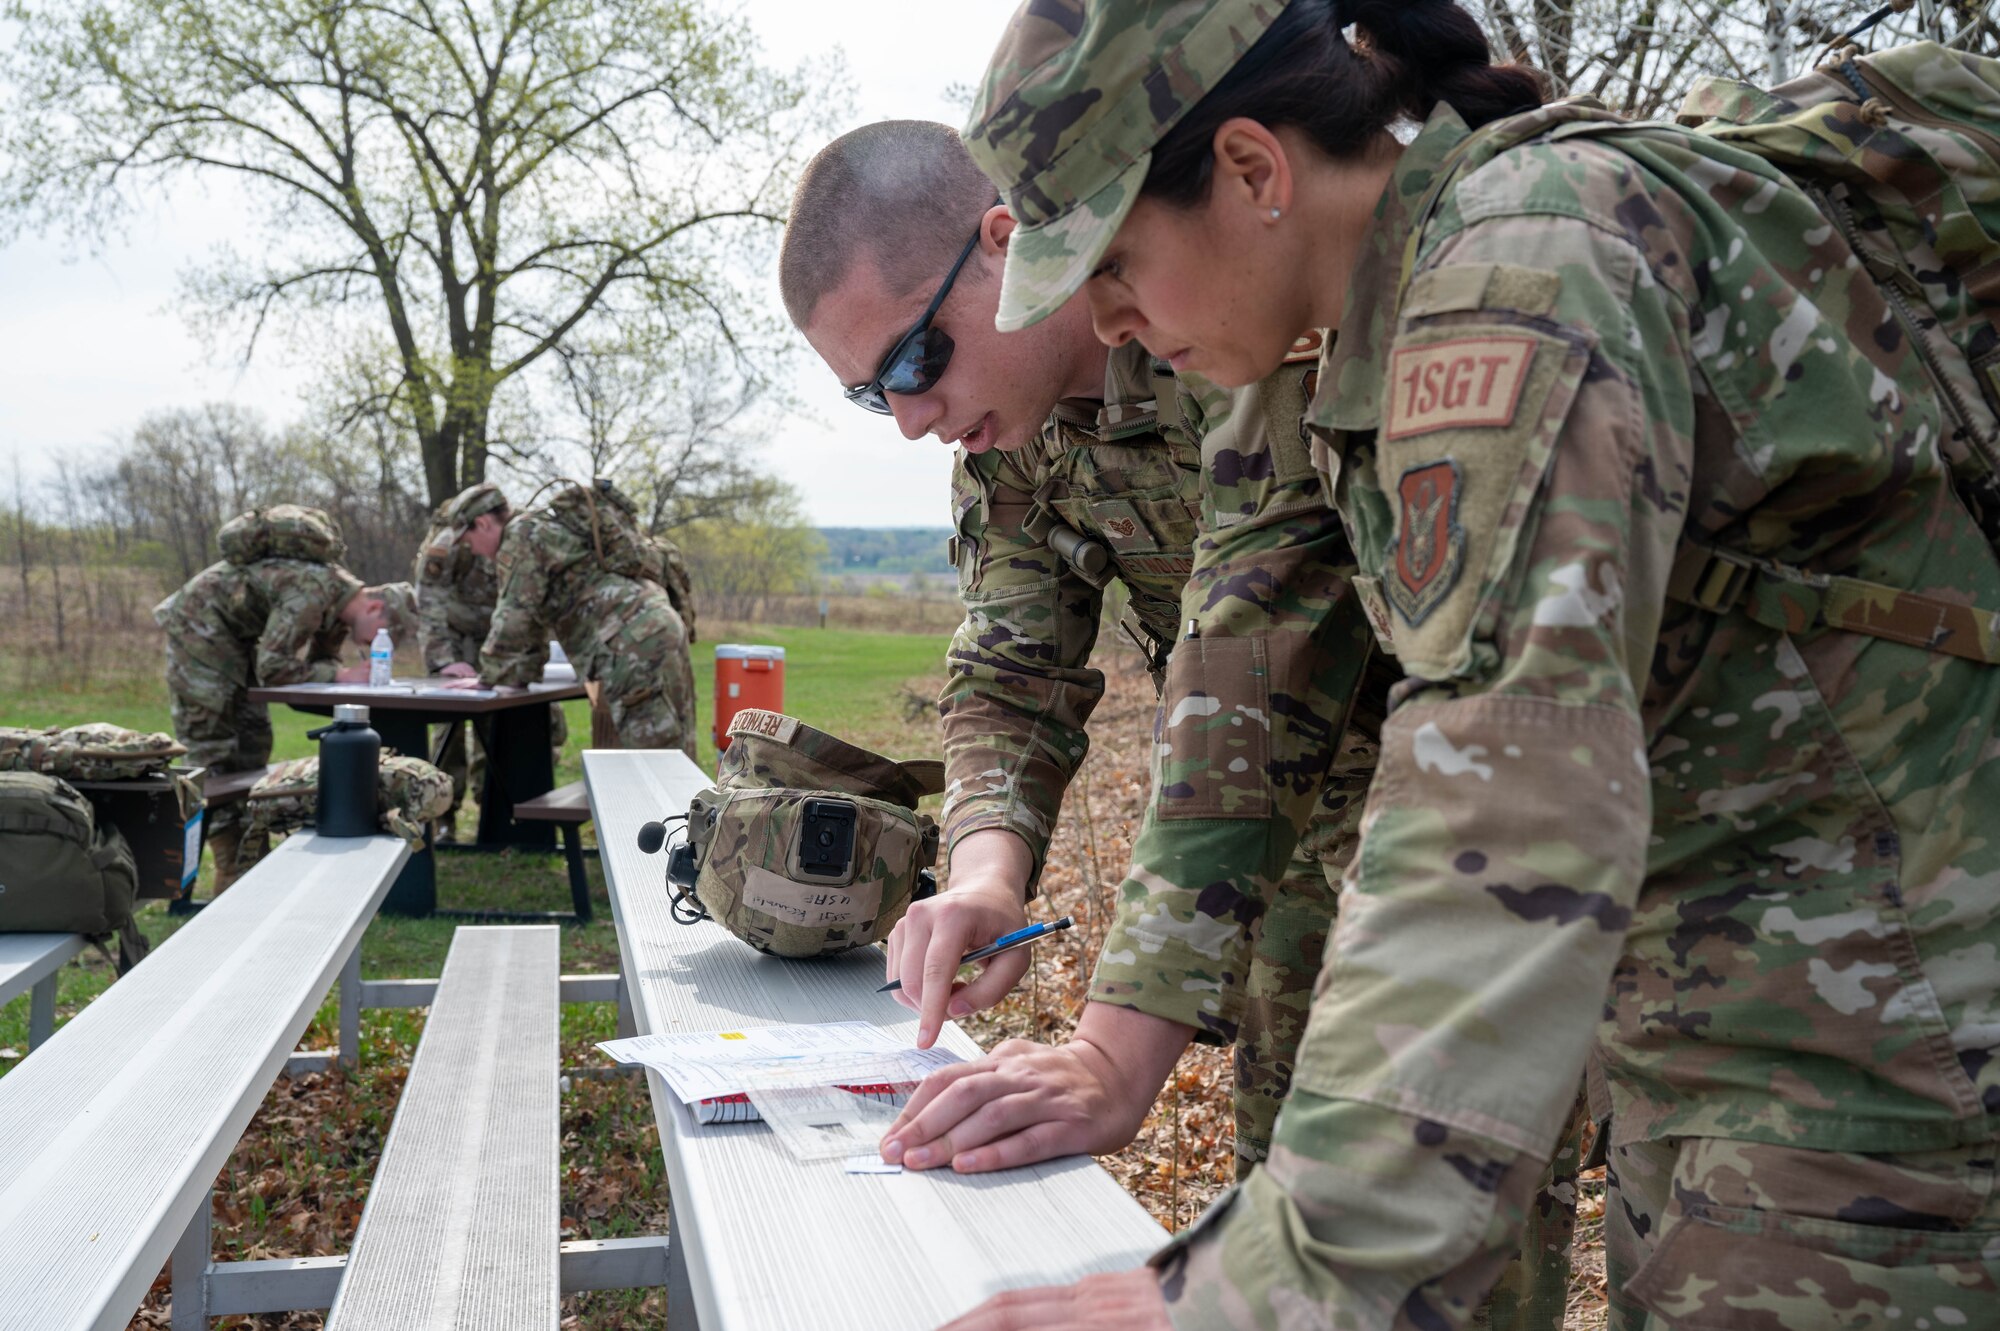 Master Sgt. Robin Barber, the 934th Security Forces Squadron 1st Sgt., right, and Staff Sgt. Ian Reynolds, a 934 SFS specialist, plot out a path on a map for a land navigation exercise at Arden Hills, Minnesota, May 7, 2023. The 934 SFS conducted a routine land navigation course to refresh and brush up on the arduous process of using a compass and pace count. (U.S. Air Force photo by Senior Airman Matthew Reisdorf)